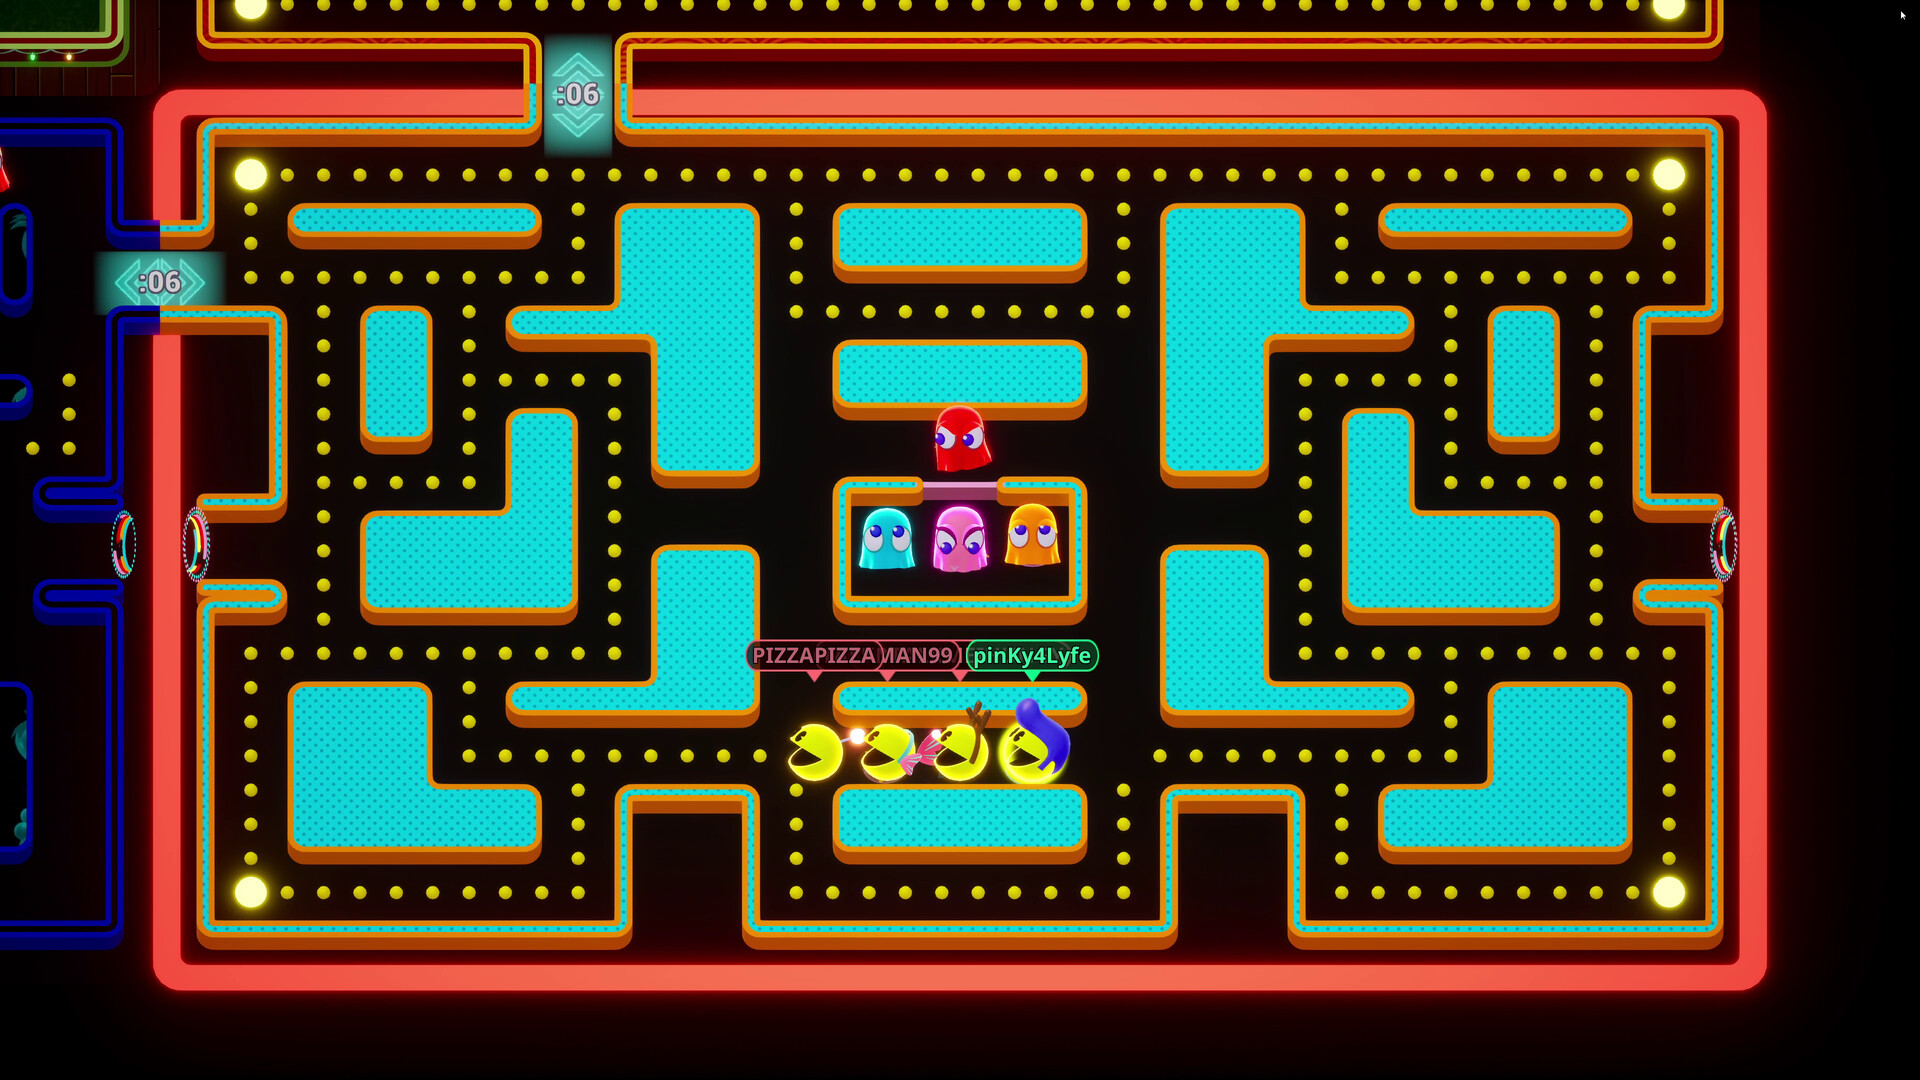 How to play with friends - PAC-MAN 99